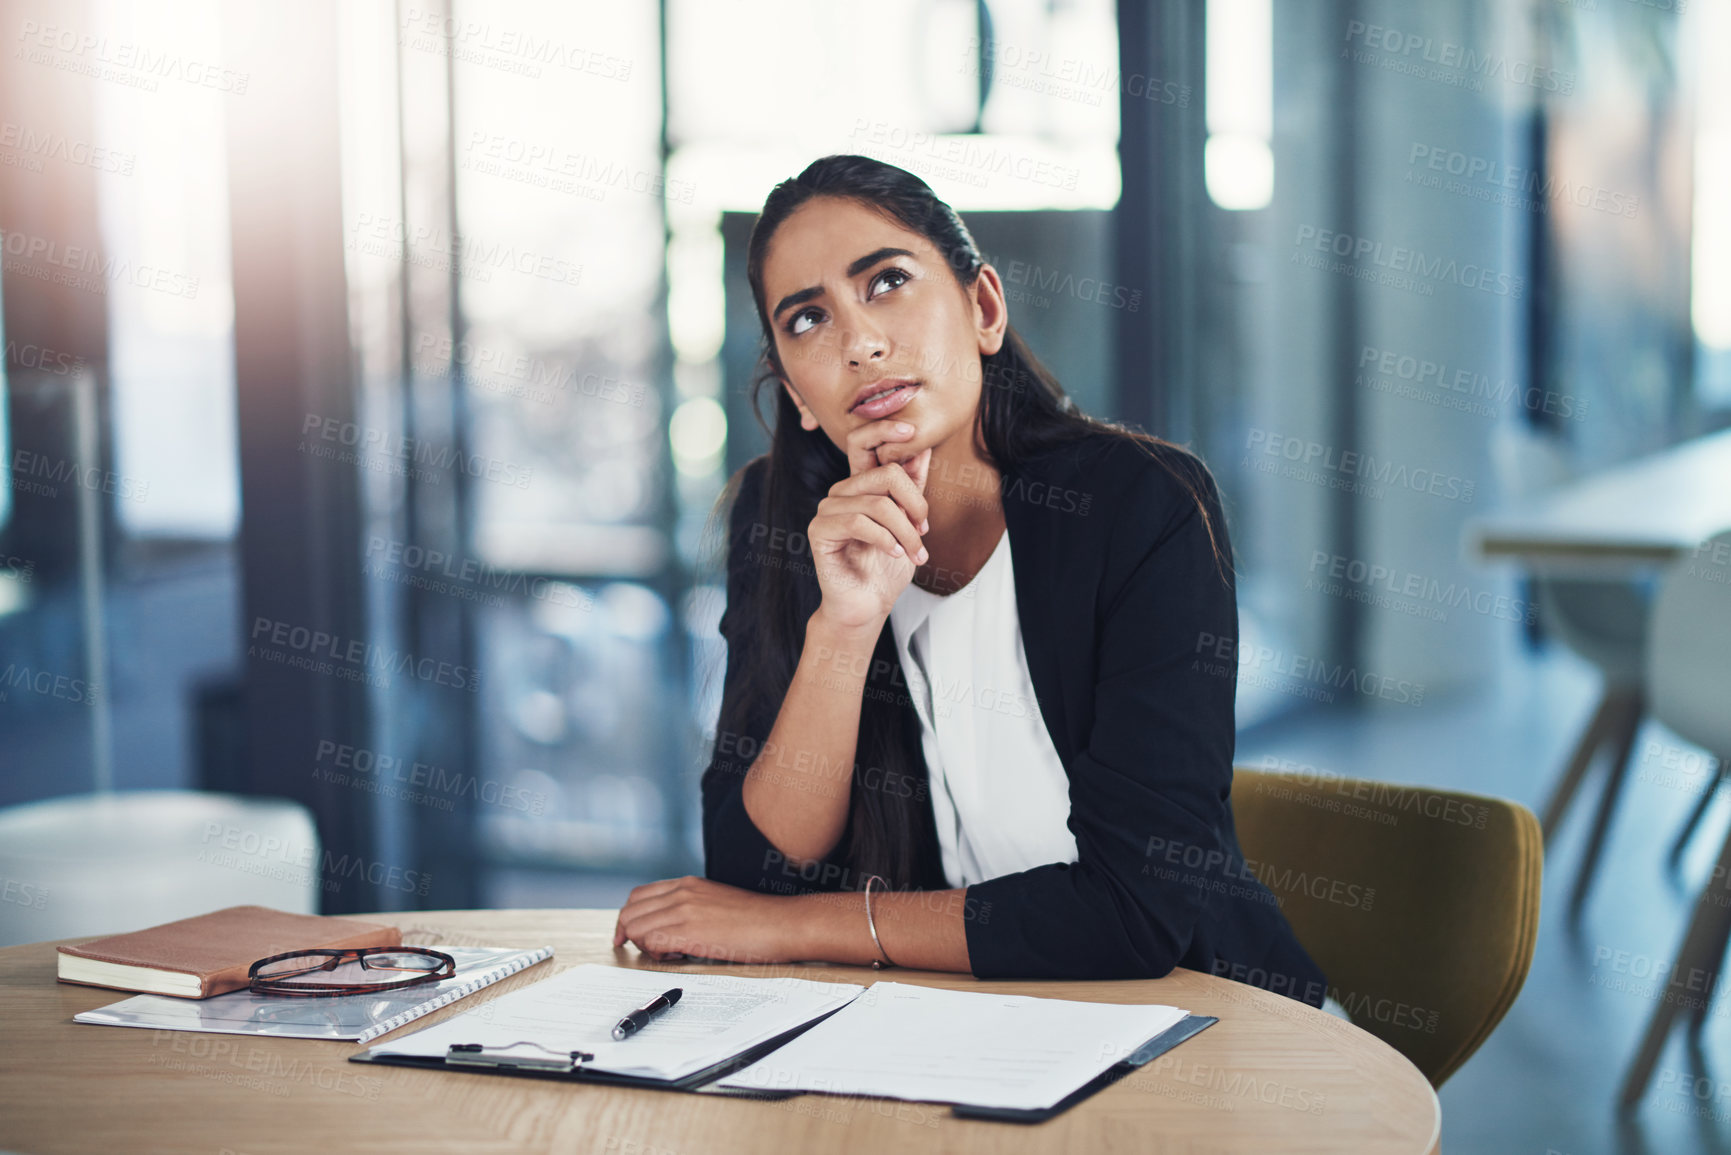 Buy stock photo Shot of a young businesswoman looking thoughtful while working in an office